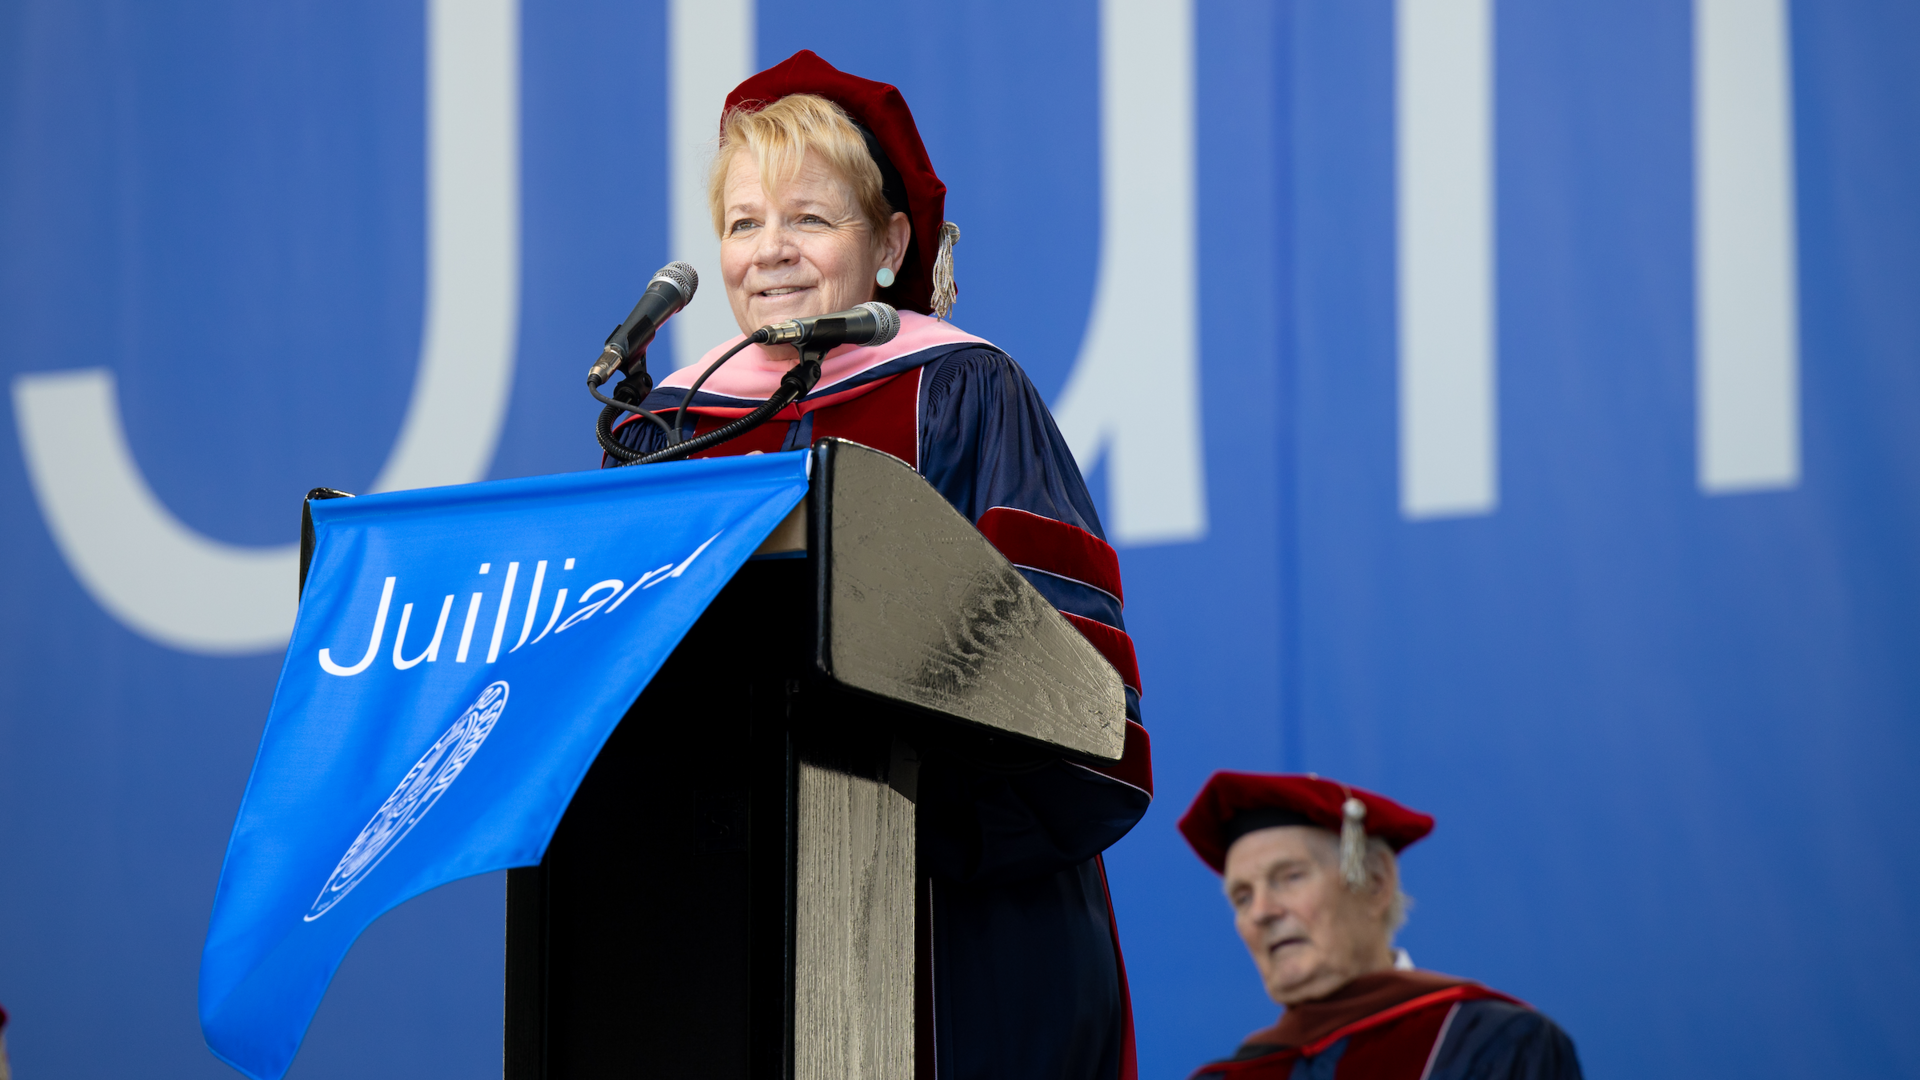 Marin Alsop in graduation regalia delivering a speech at a podium with a banner that says Juilliard and behind her is a big blue banner that says Juilliard